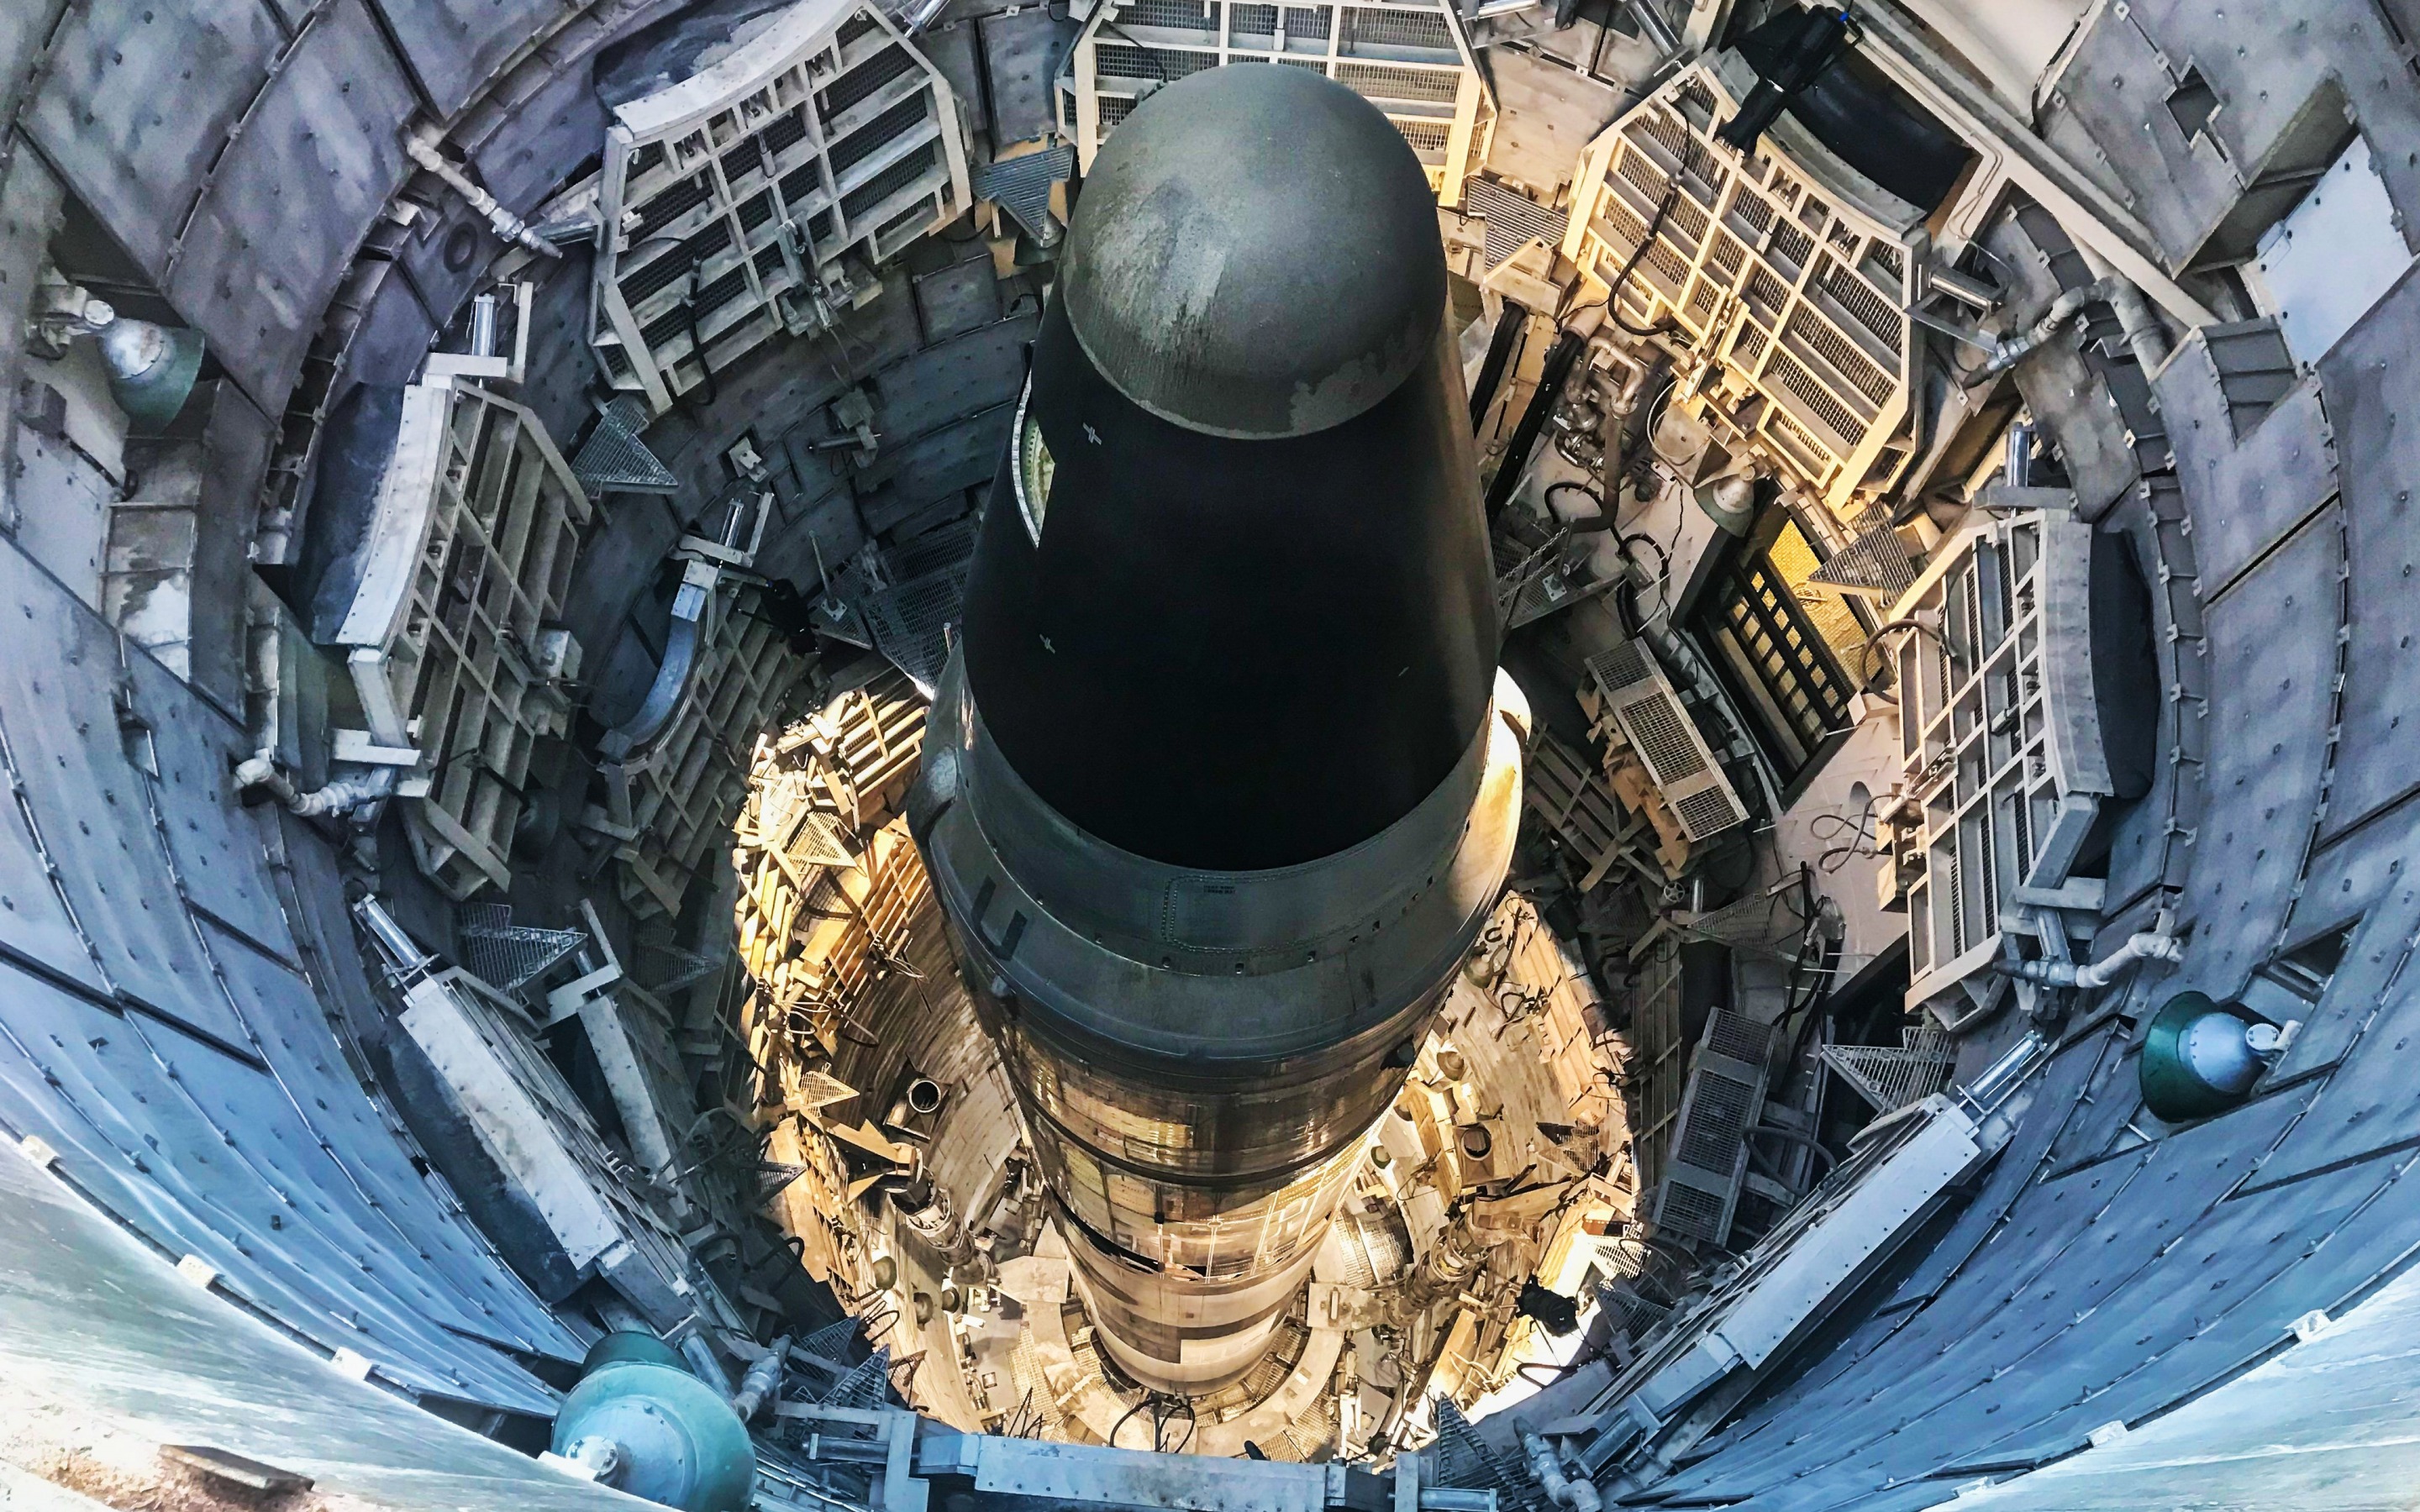 Download wallpaper Titan II ICBM Site 571- Air Force Facility Missile Site Titan Missile Museum, Green Valley, Sahuarita, Arizona, United States for desktop with resolution 2880x1800. High Quality HD picture wallpaper